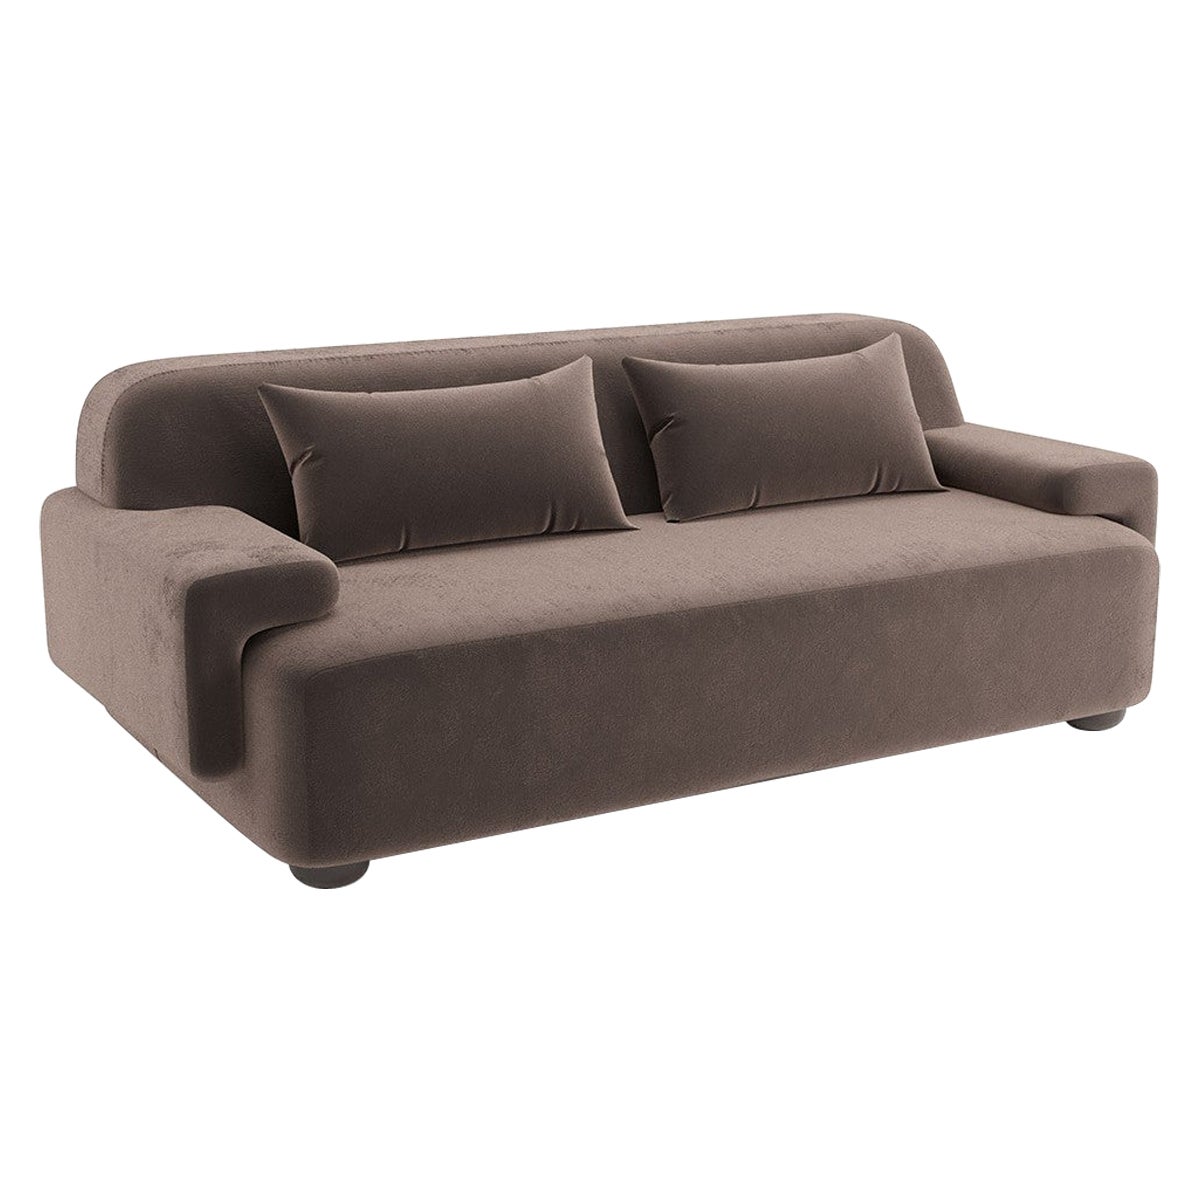 Popus Editions Lena 2.5 Seater Sofa in Mole Taupe Como Velvet Upholstery